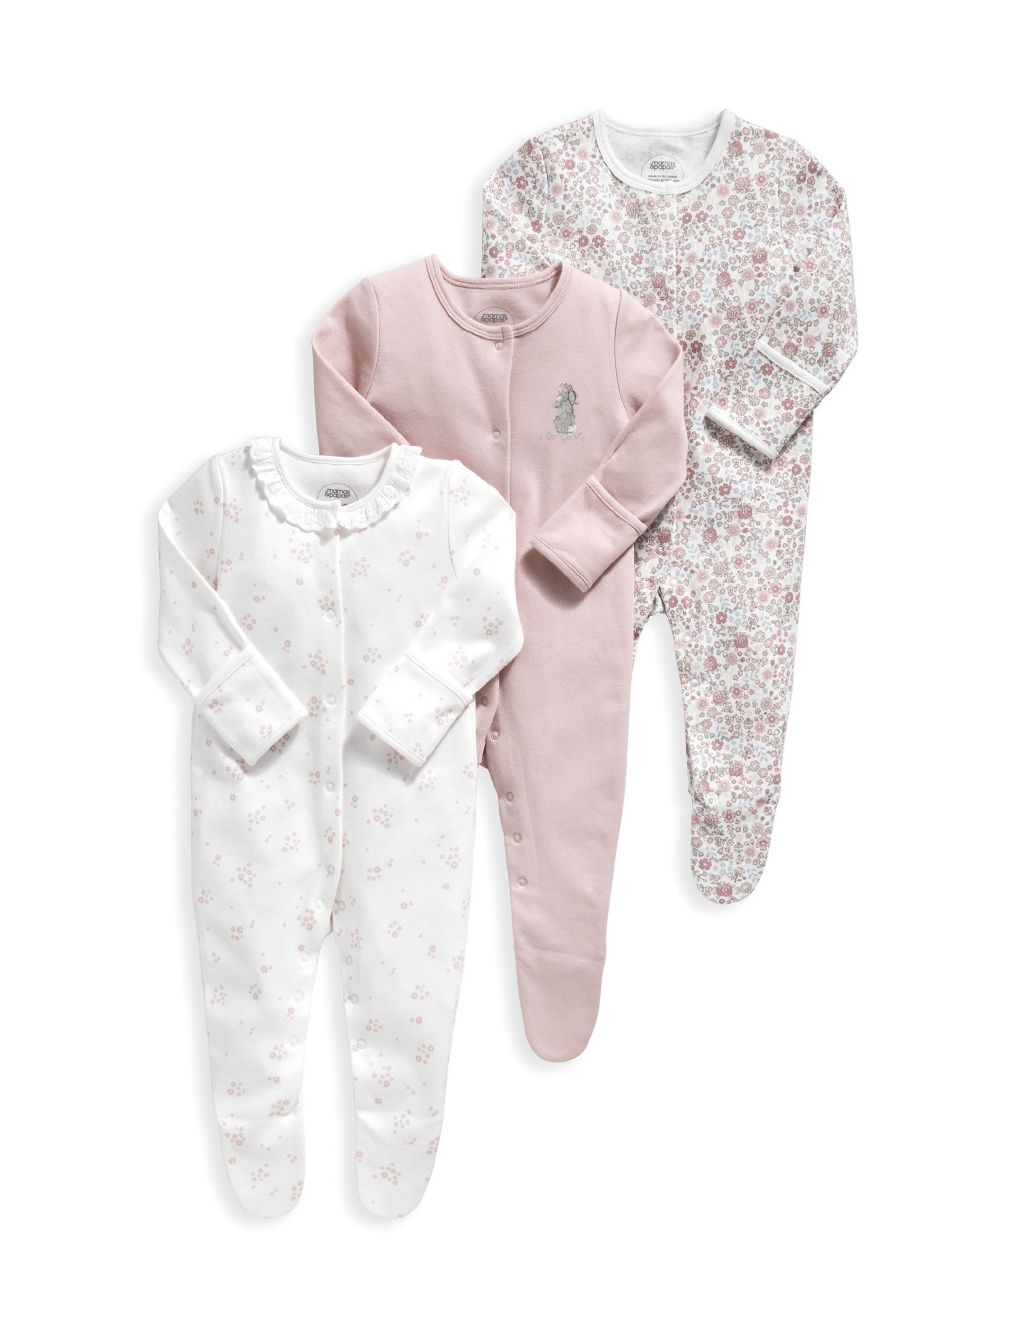 Oh Darling Girl Sleepsuits 3 Pack (6½lbs-18 Mths) image 2